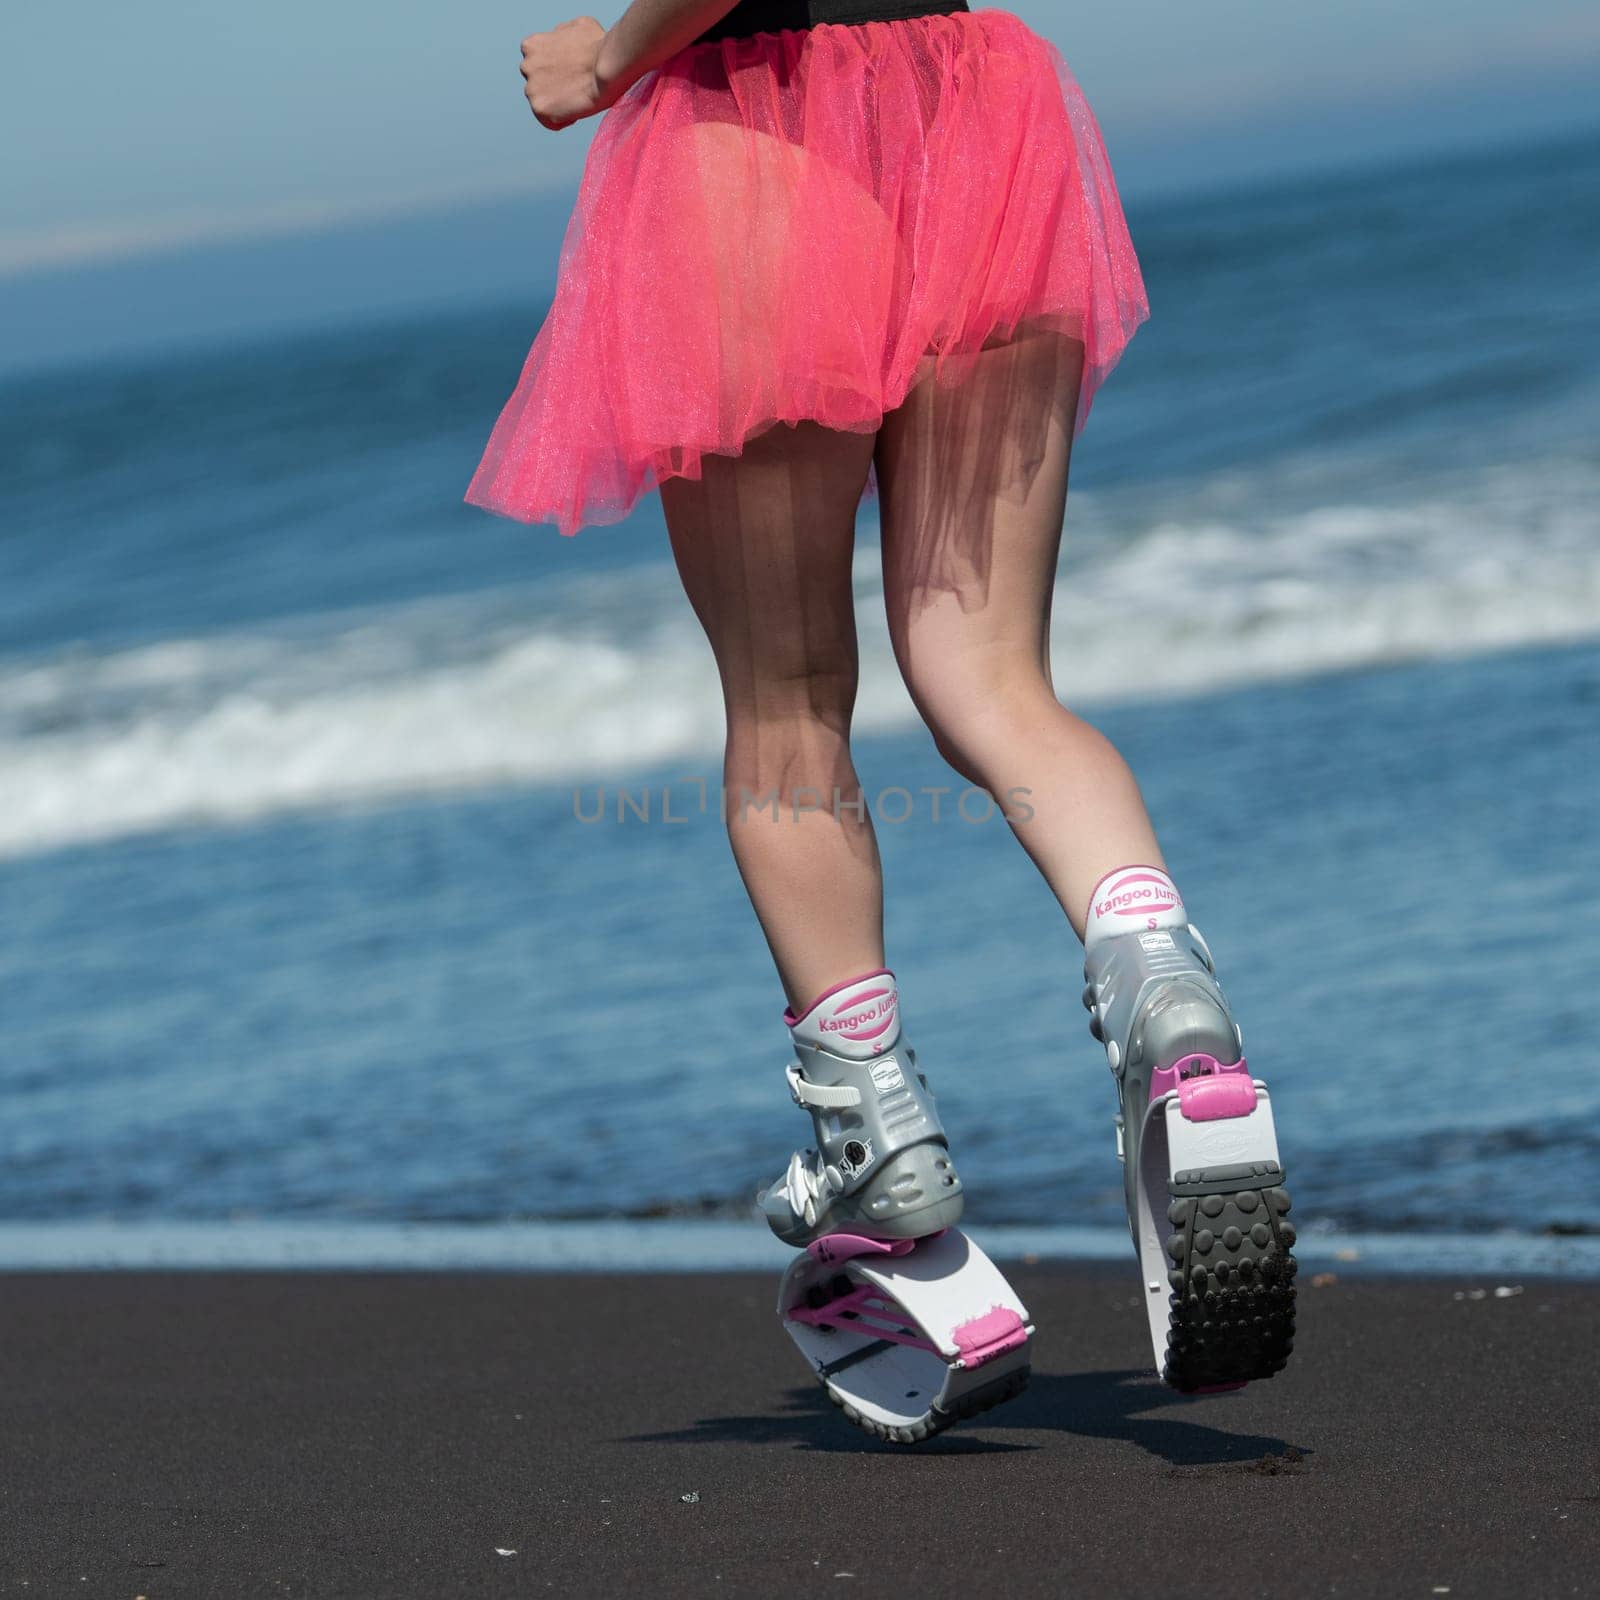 KAMCHATKA, RUSSIA - JUNE 15, 2022: Rear view of female legs in sports Kangoo Jumps boots, swimsuit and short pink skirt running and jumping on sandy beach during fitness training. Dutch angle shot